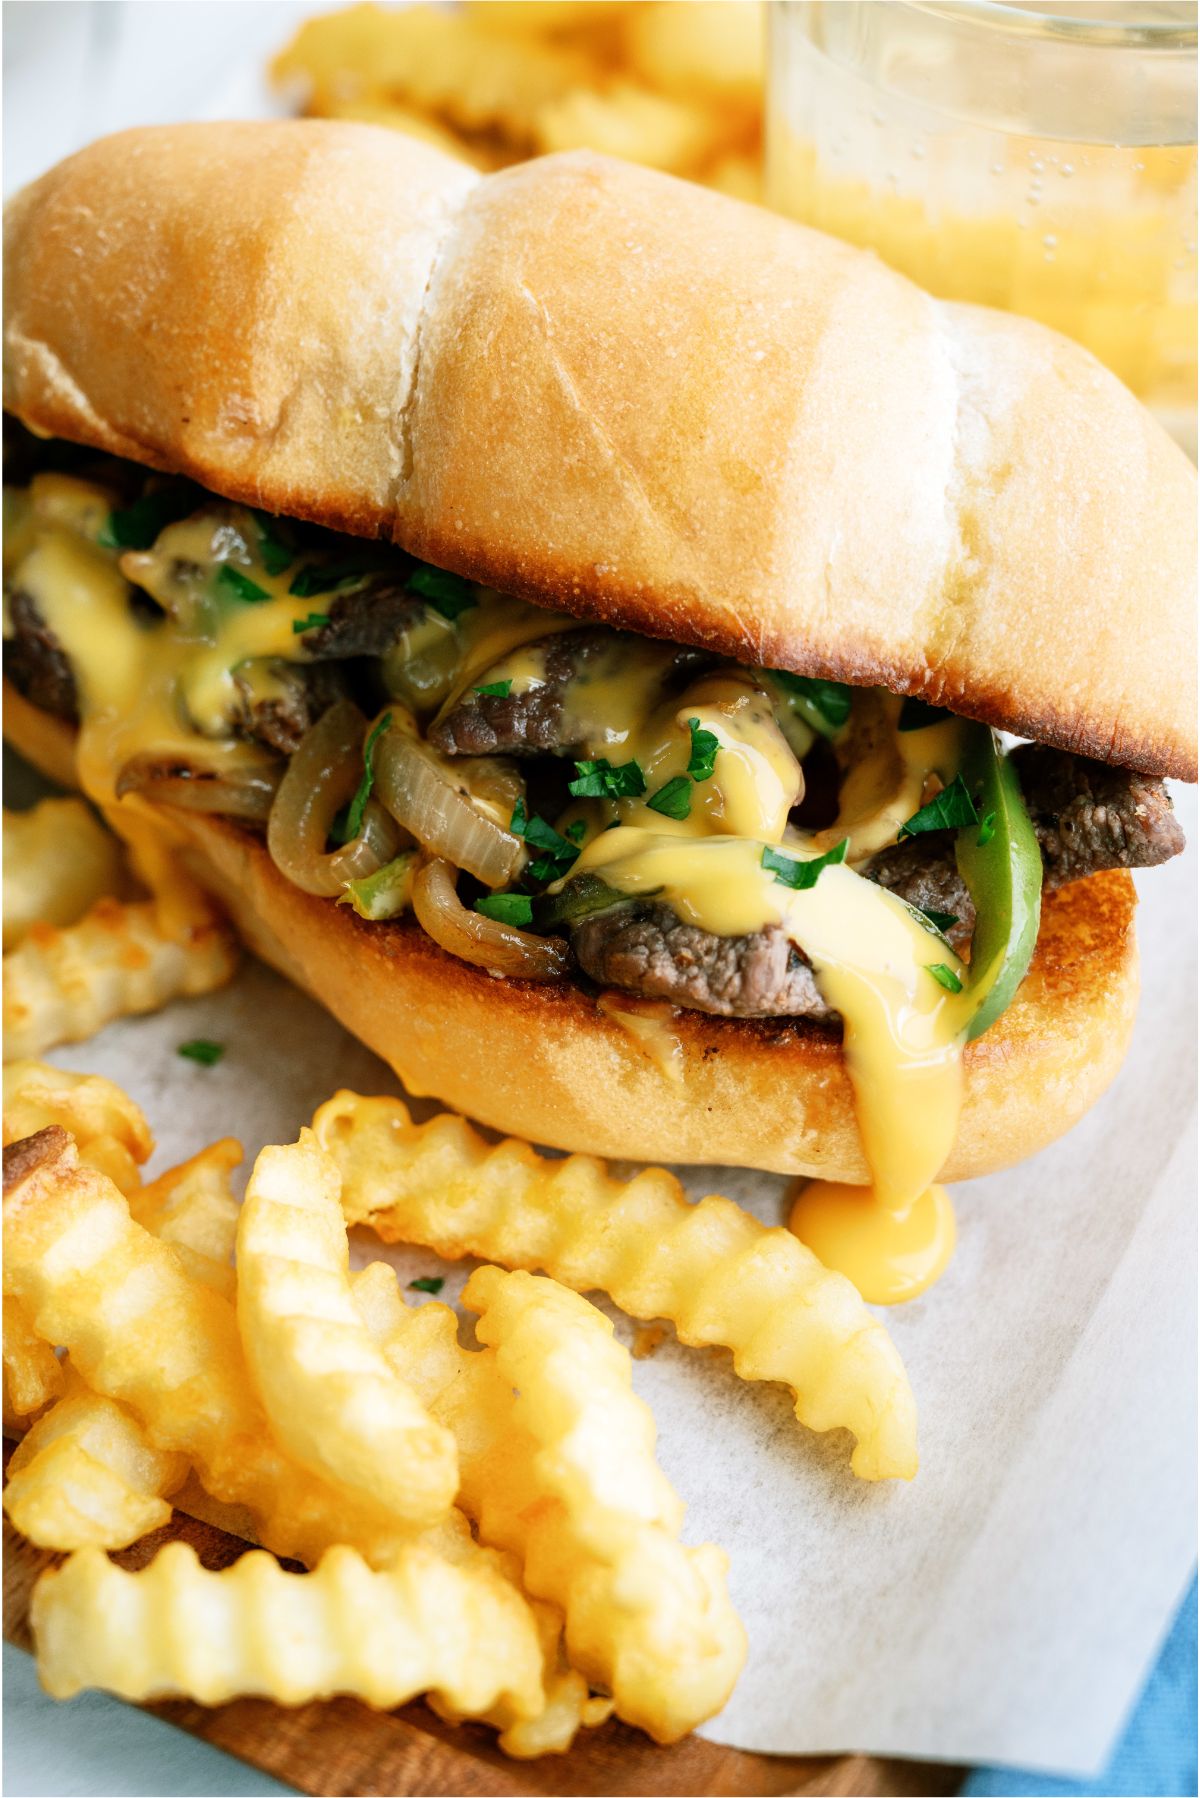 Philly Cheesesteak sandwich with Fries